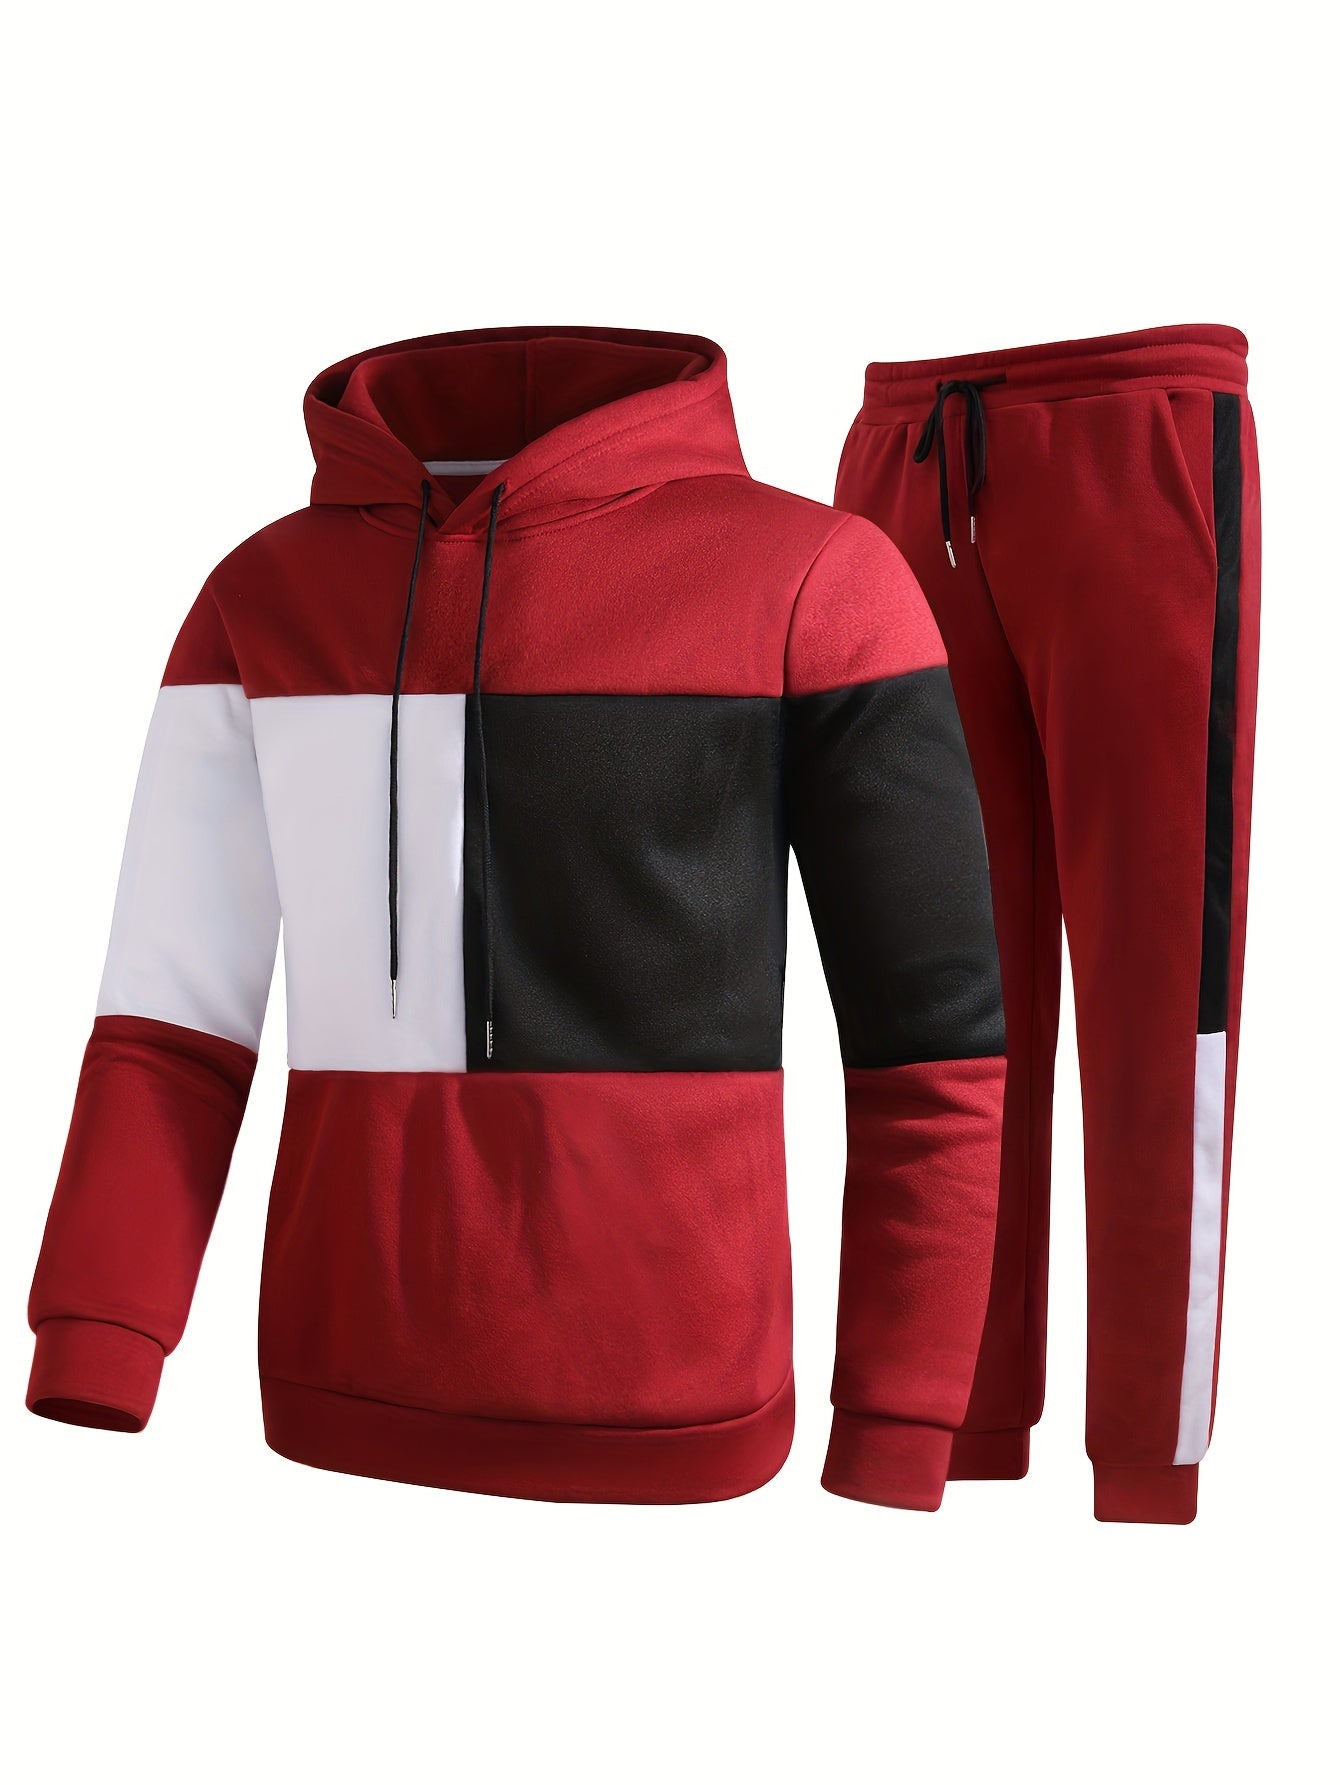 Men's Colorblock Hooded Sweatshirt Casual Outfit Set, 2 Pieces Long Sleeve Pullover Hoodies And Drawstring Sweatpants